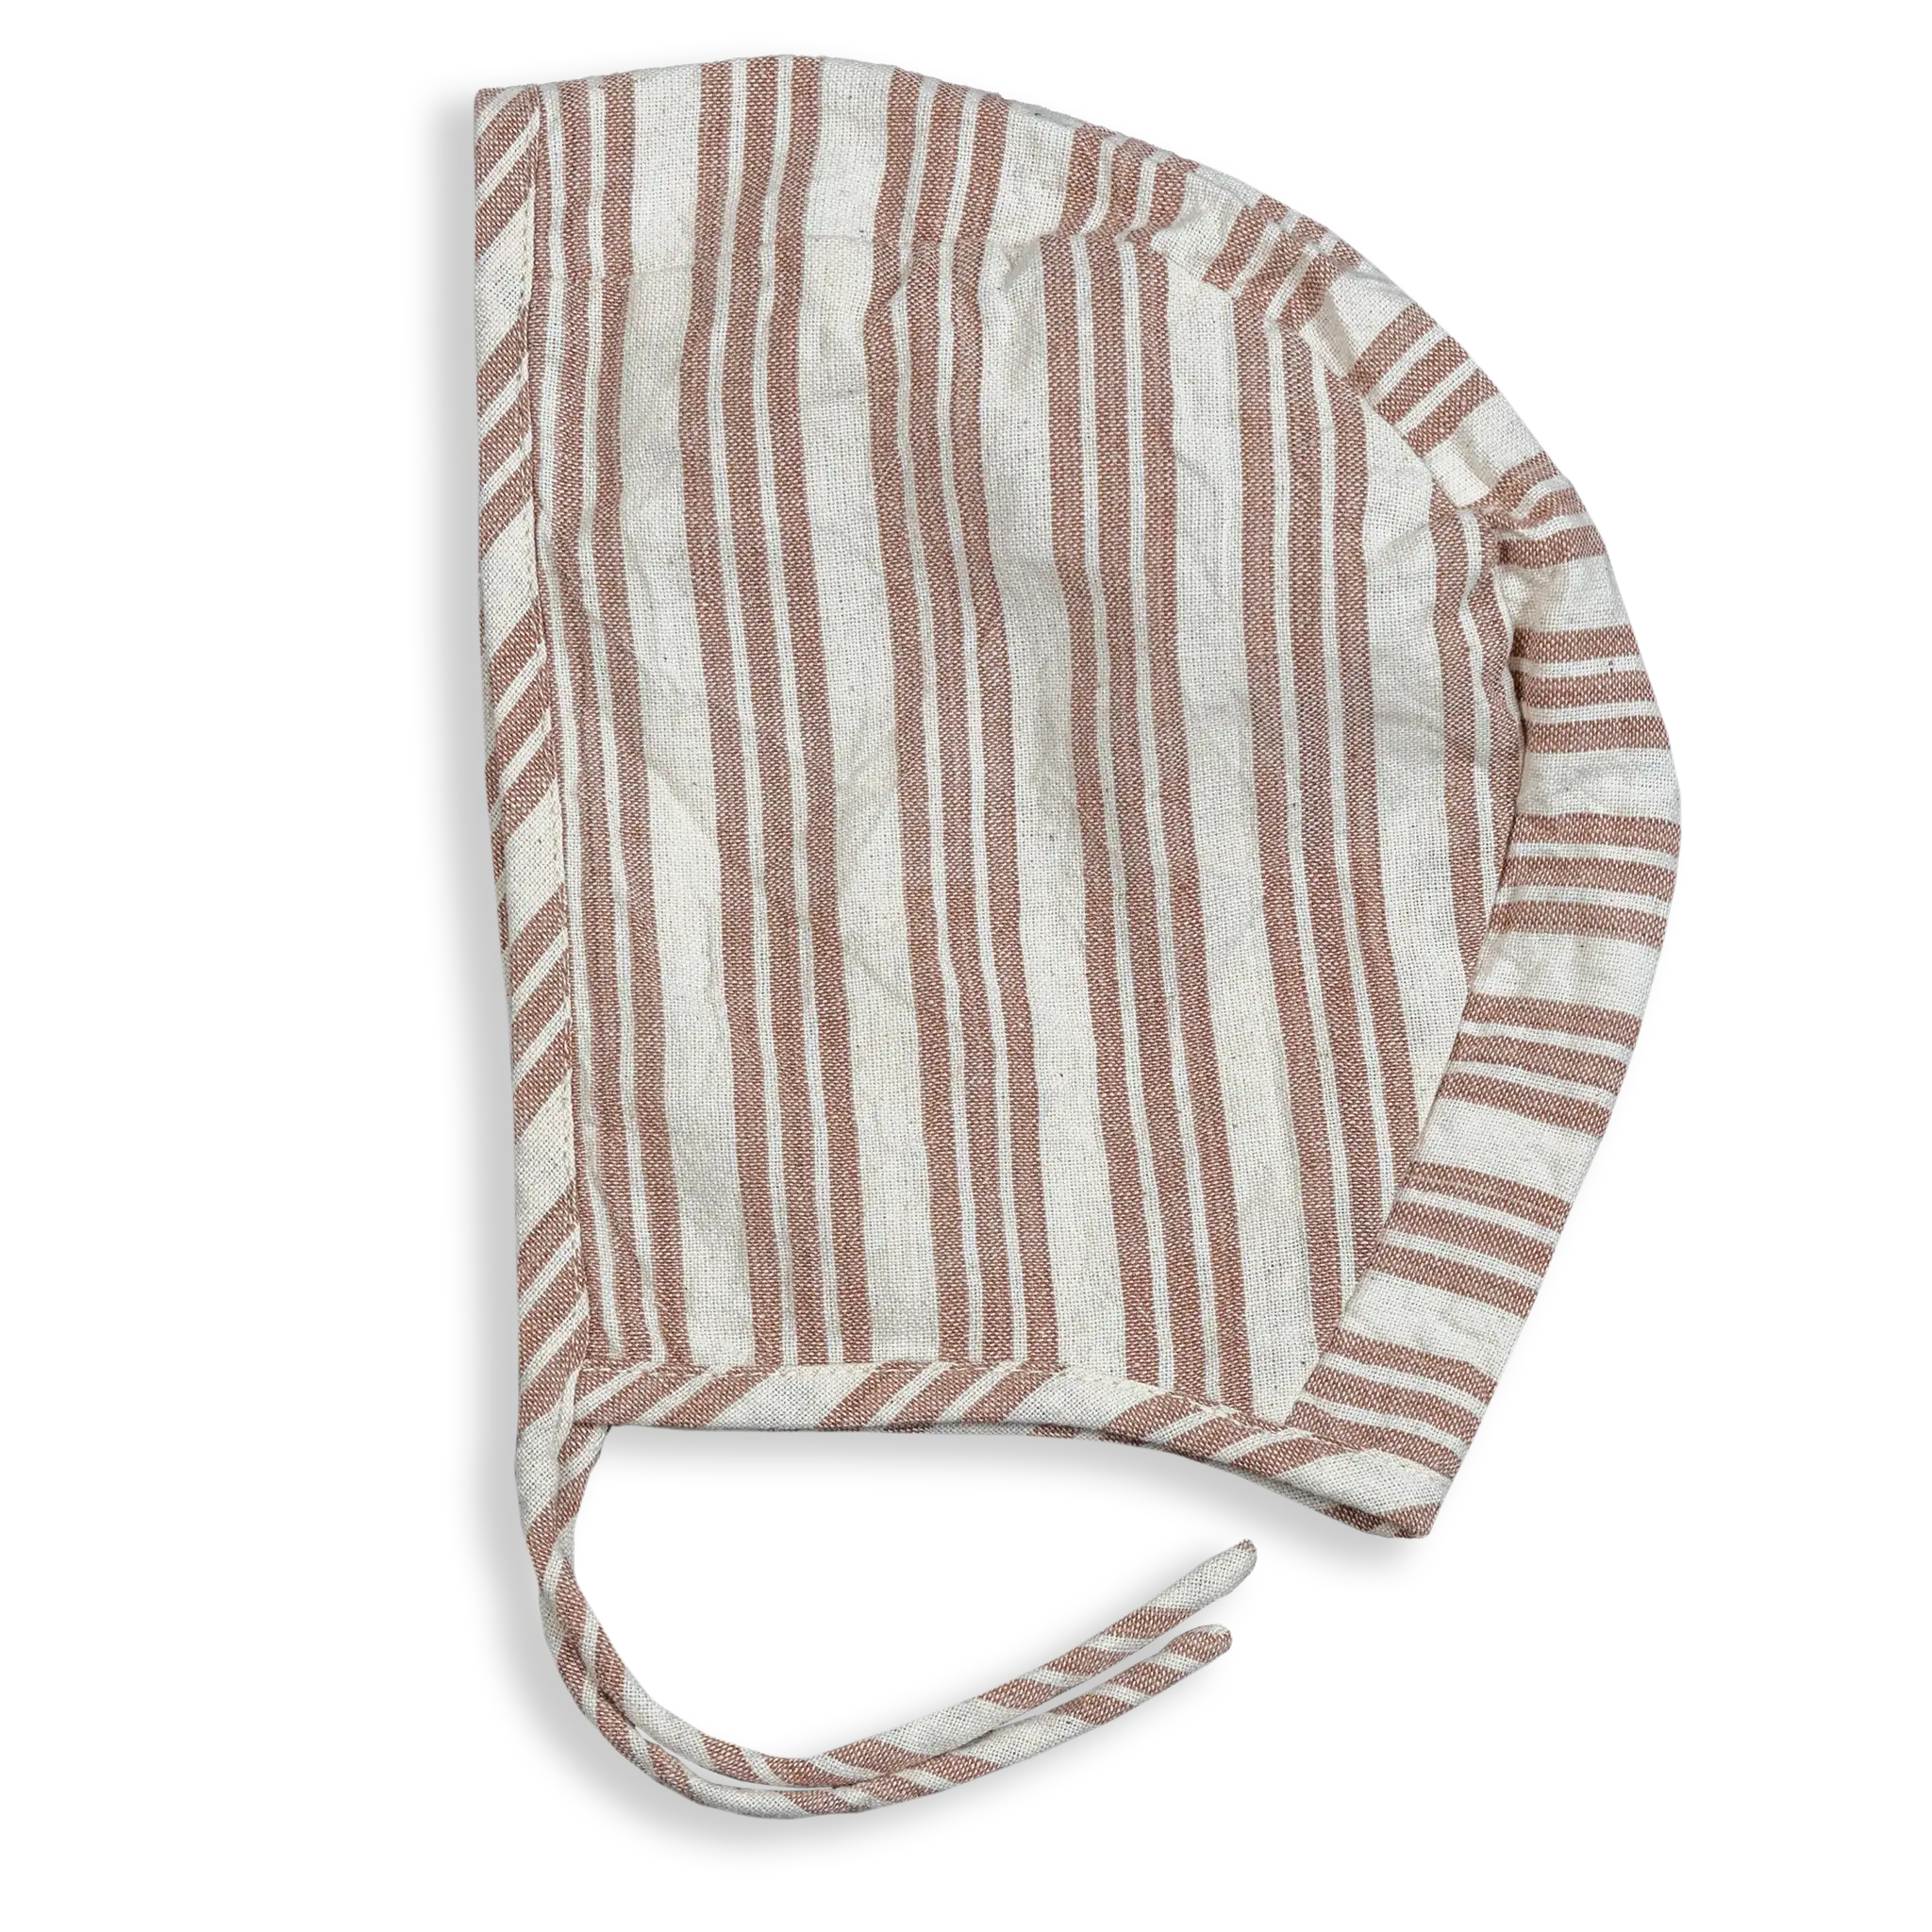 Our Baby Hats are made from the same 100% woven cotton lined with the finest muslin for your child's comfort and warmth. A pair of ties make it easy and safe to gently keep it where it belongs on your baby's head.